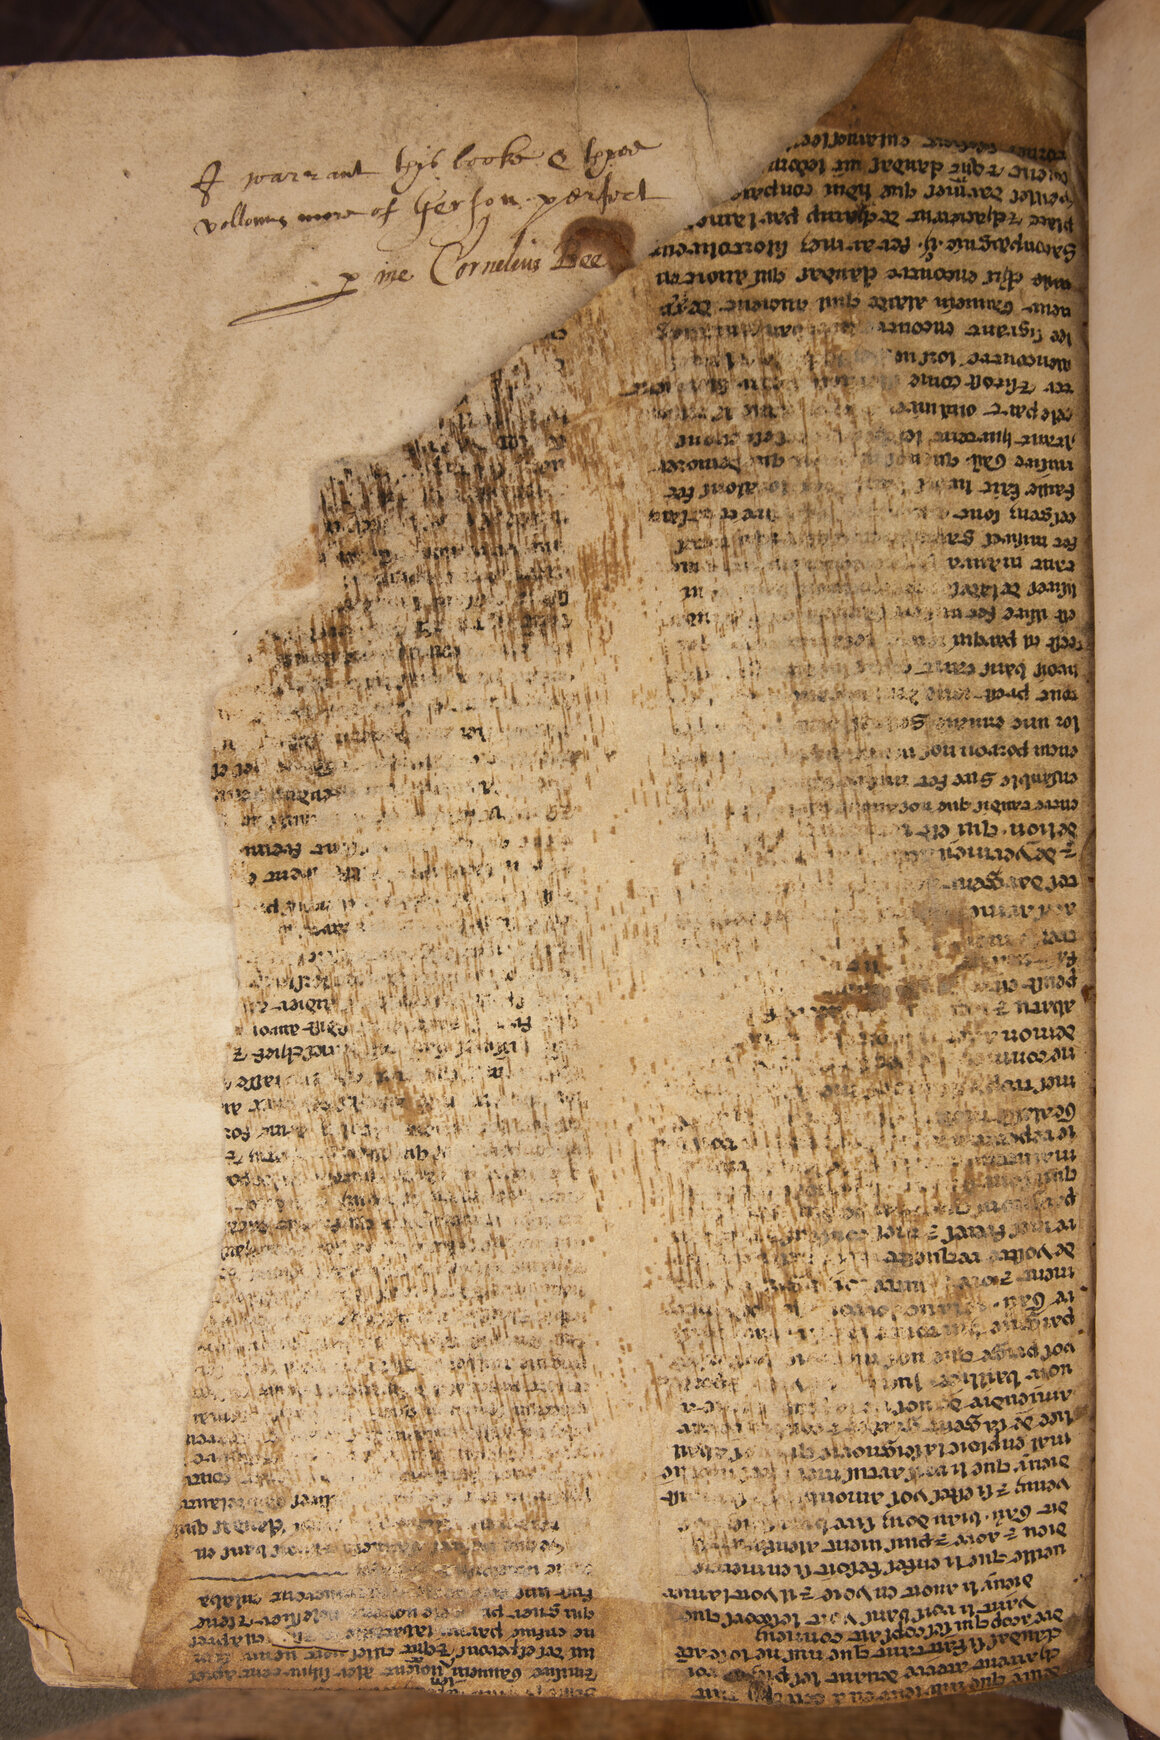 This fragment of the 